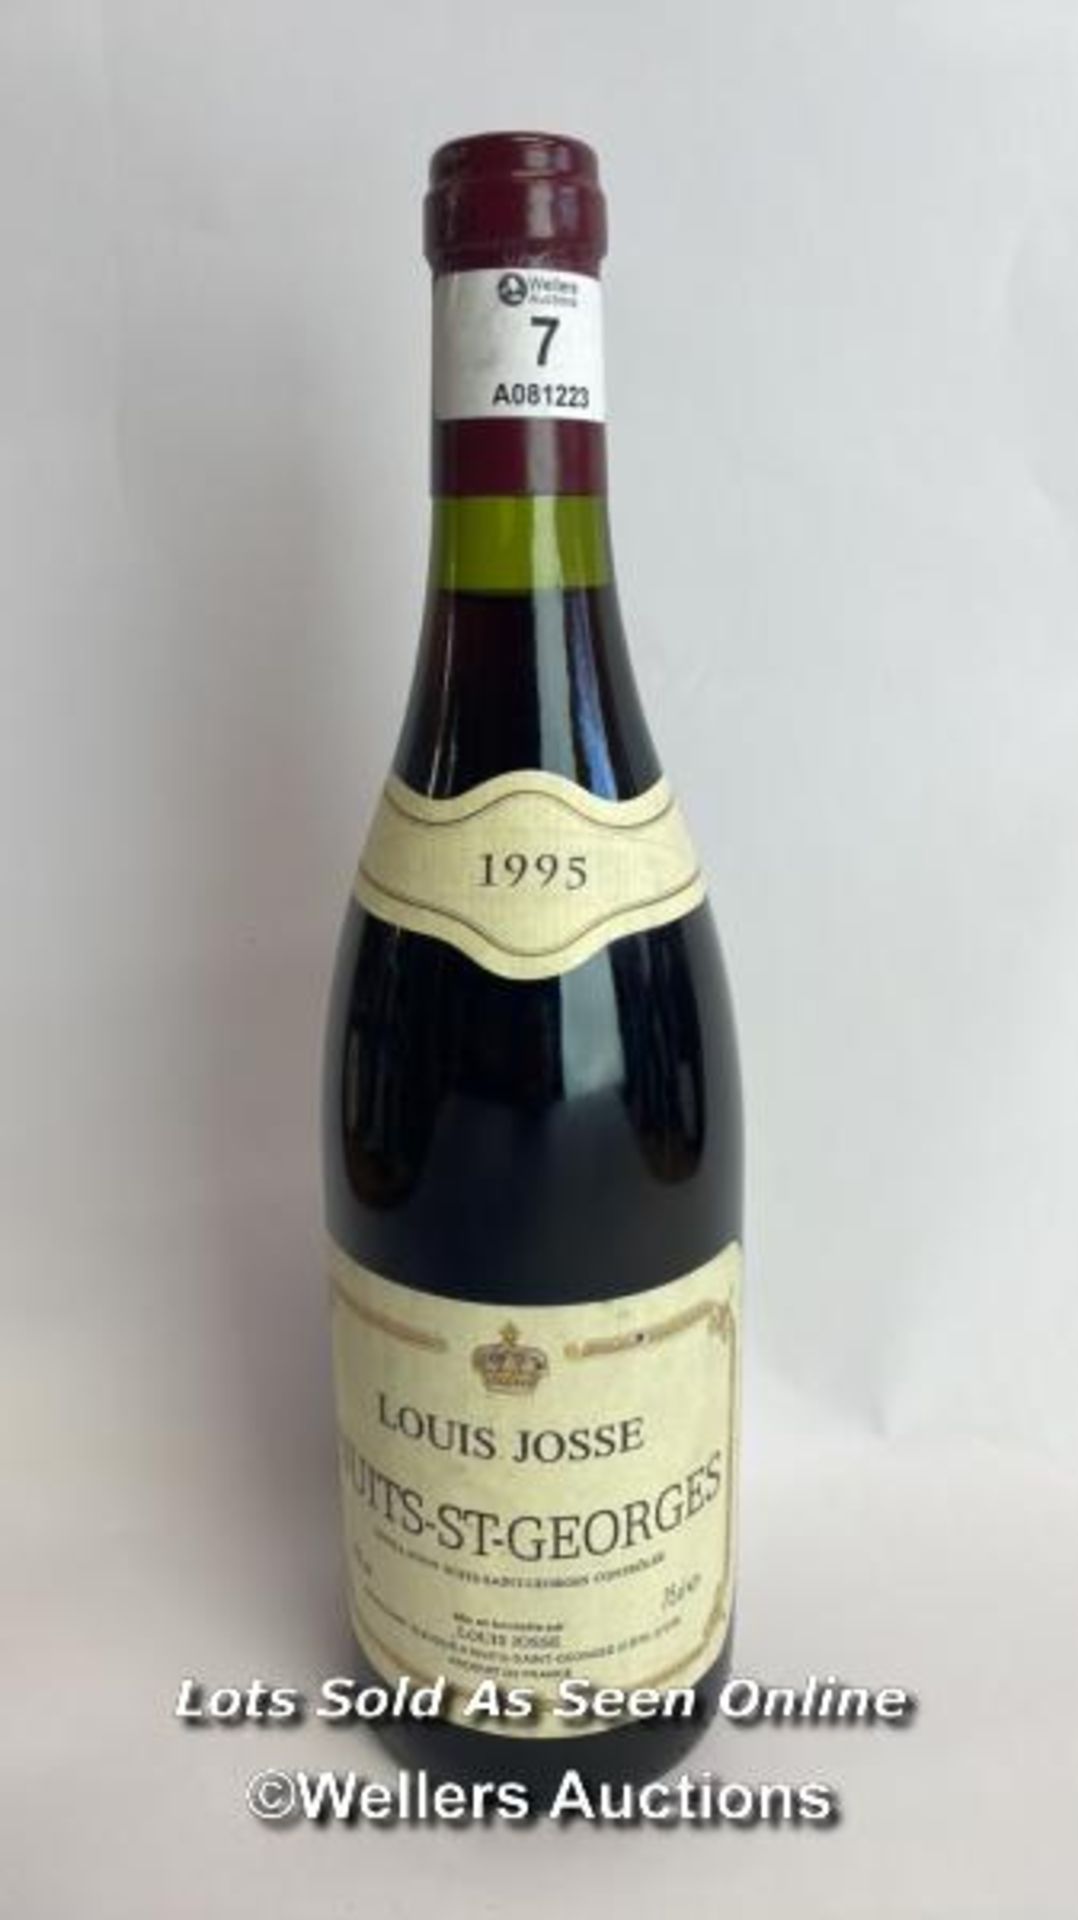 1995 Louis Josse Nuits-St-Georges, 75CL, 13% vol / Please see images for fill level and general